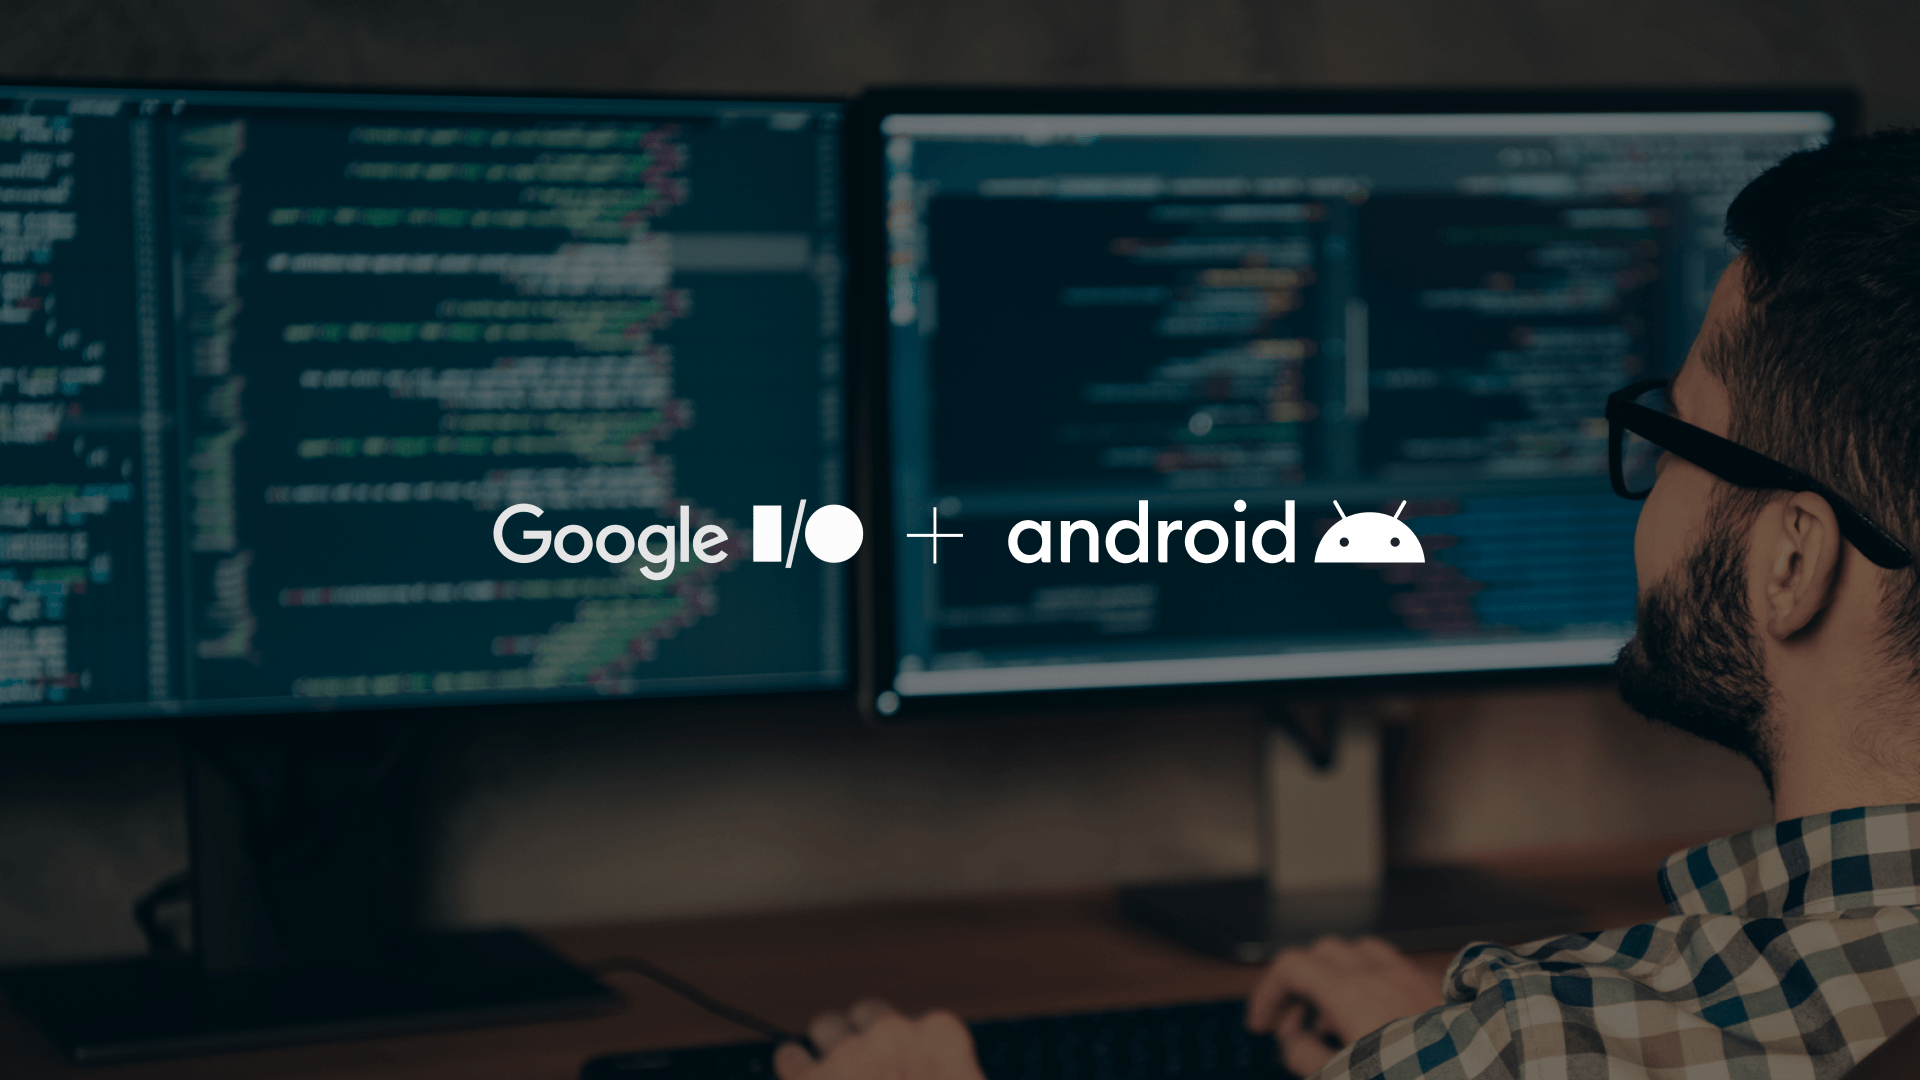 Android developers – Here are the best practices for saving the UI state